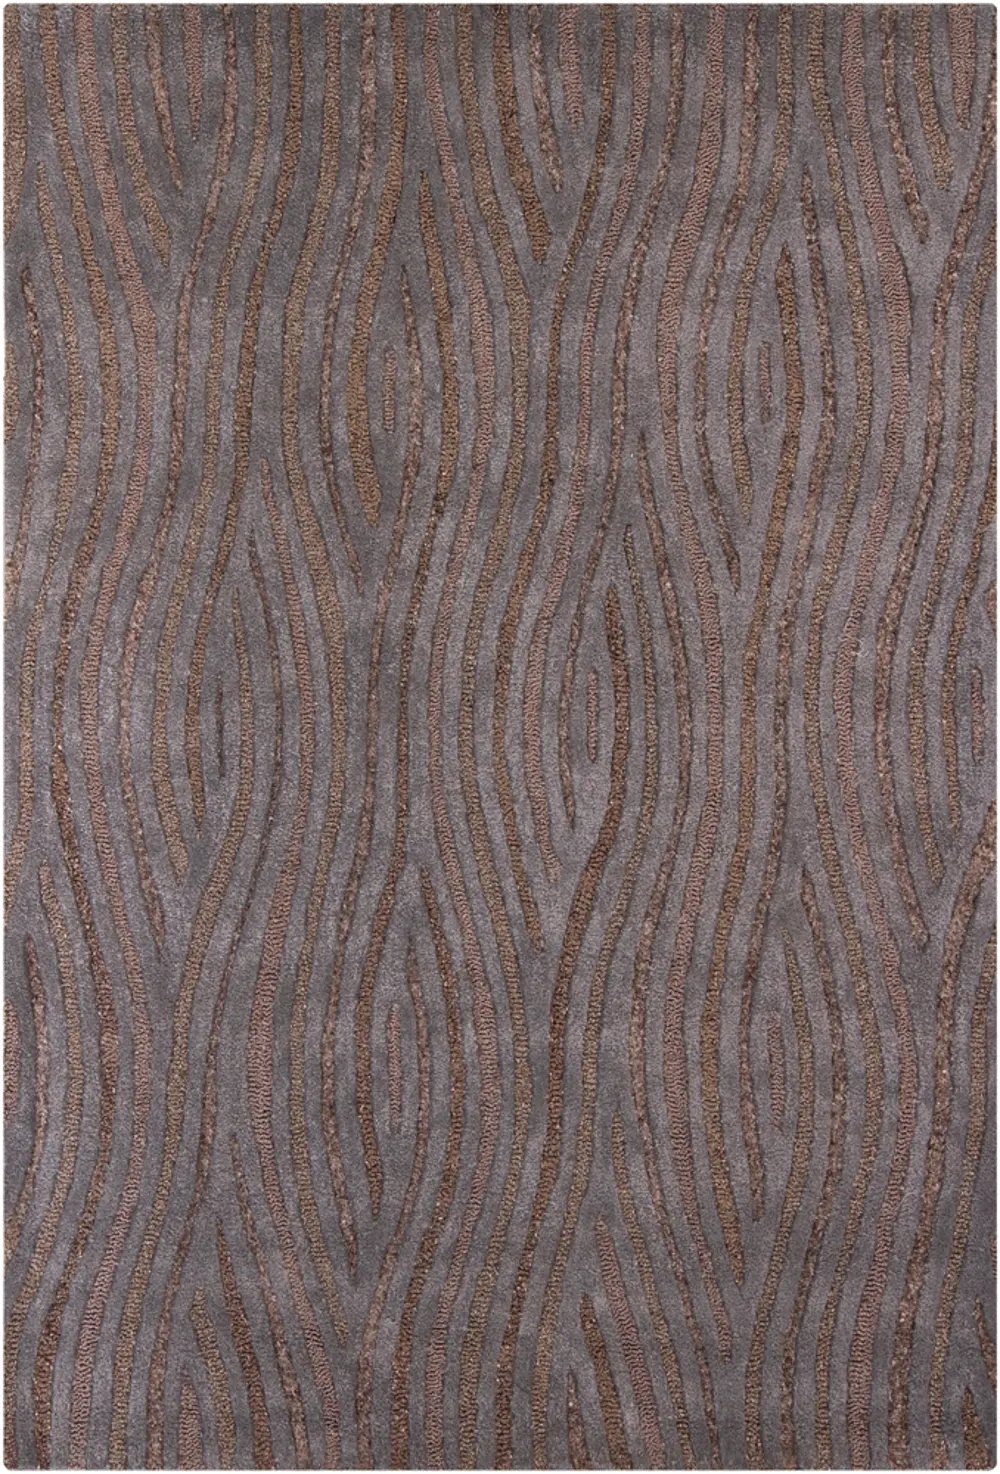 8 x 11 Large Contemporary Brown and Gray Area Rug - Penelope-1